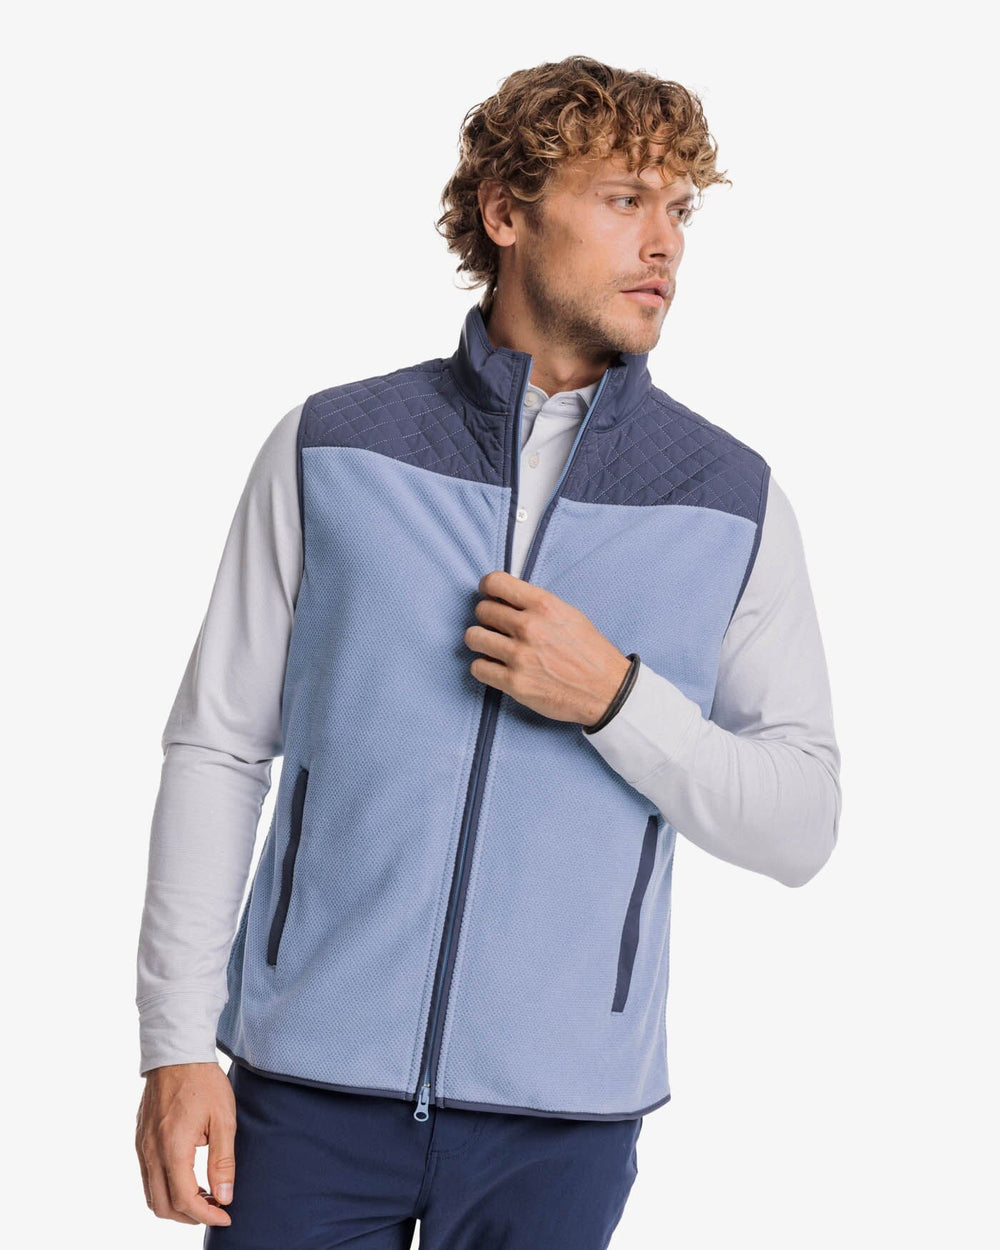 The front view of the Southern Tide Hucksley Vest by Southern Tide - Mountain Spring Blue